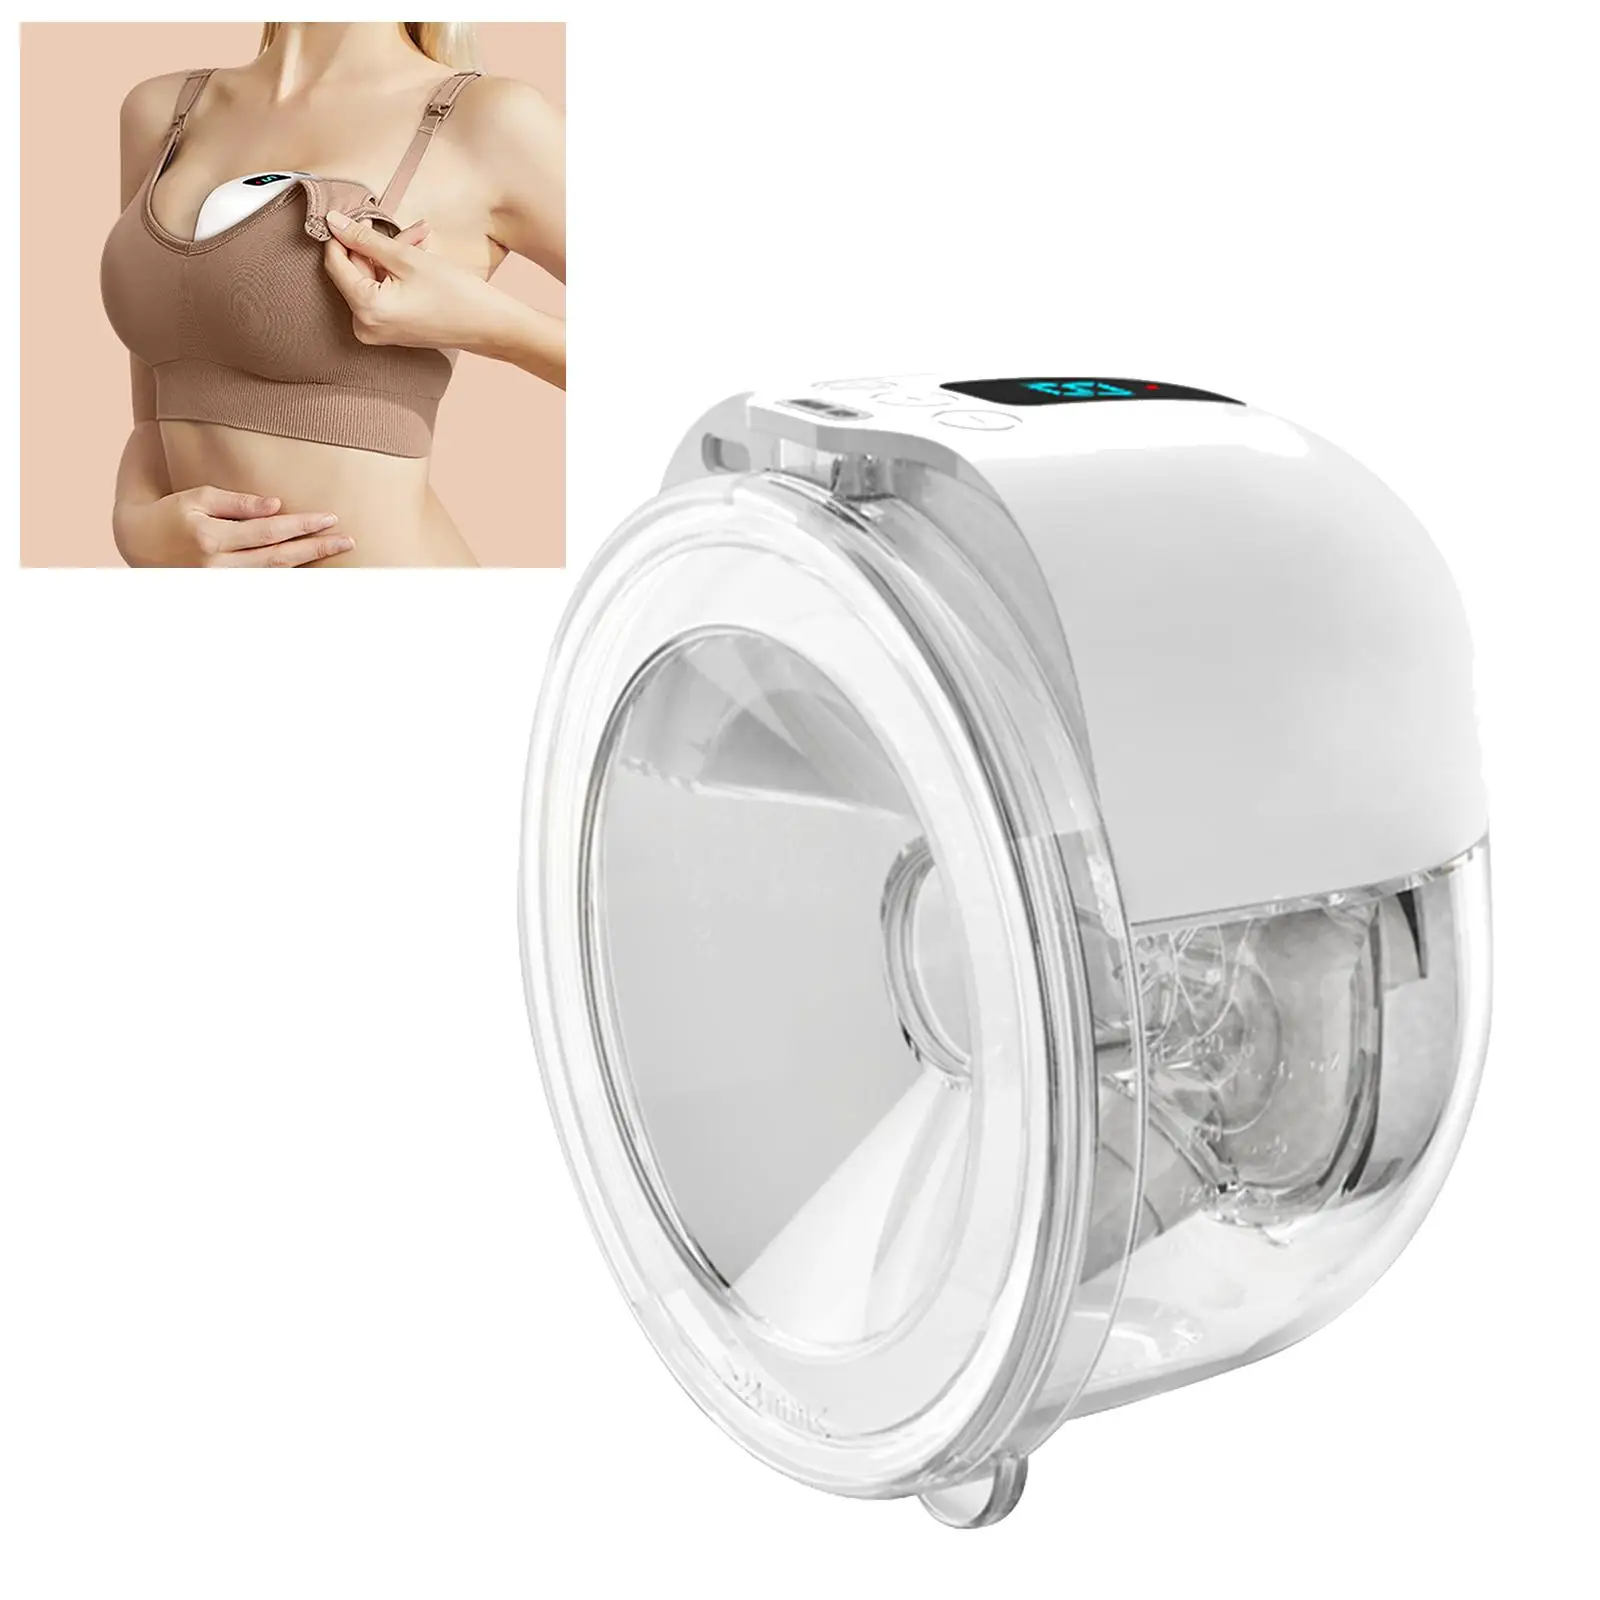 Wearable Breast Pump LED Display 3 Modes 9 Gears 110 Degree Large Wide Angle Milk Extractor Rechargeable Portable Breast Pump